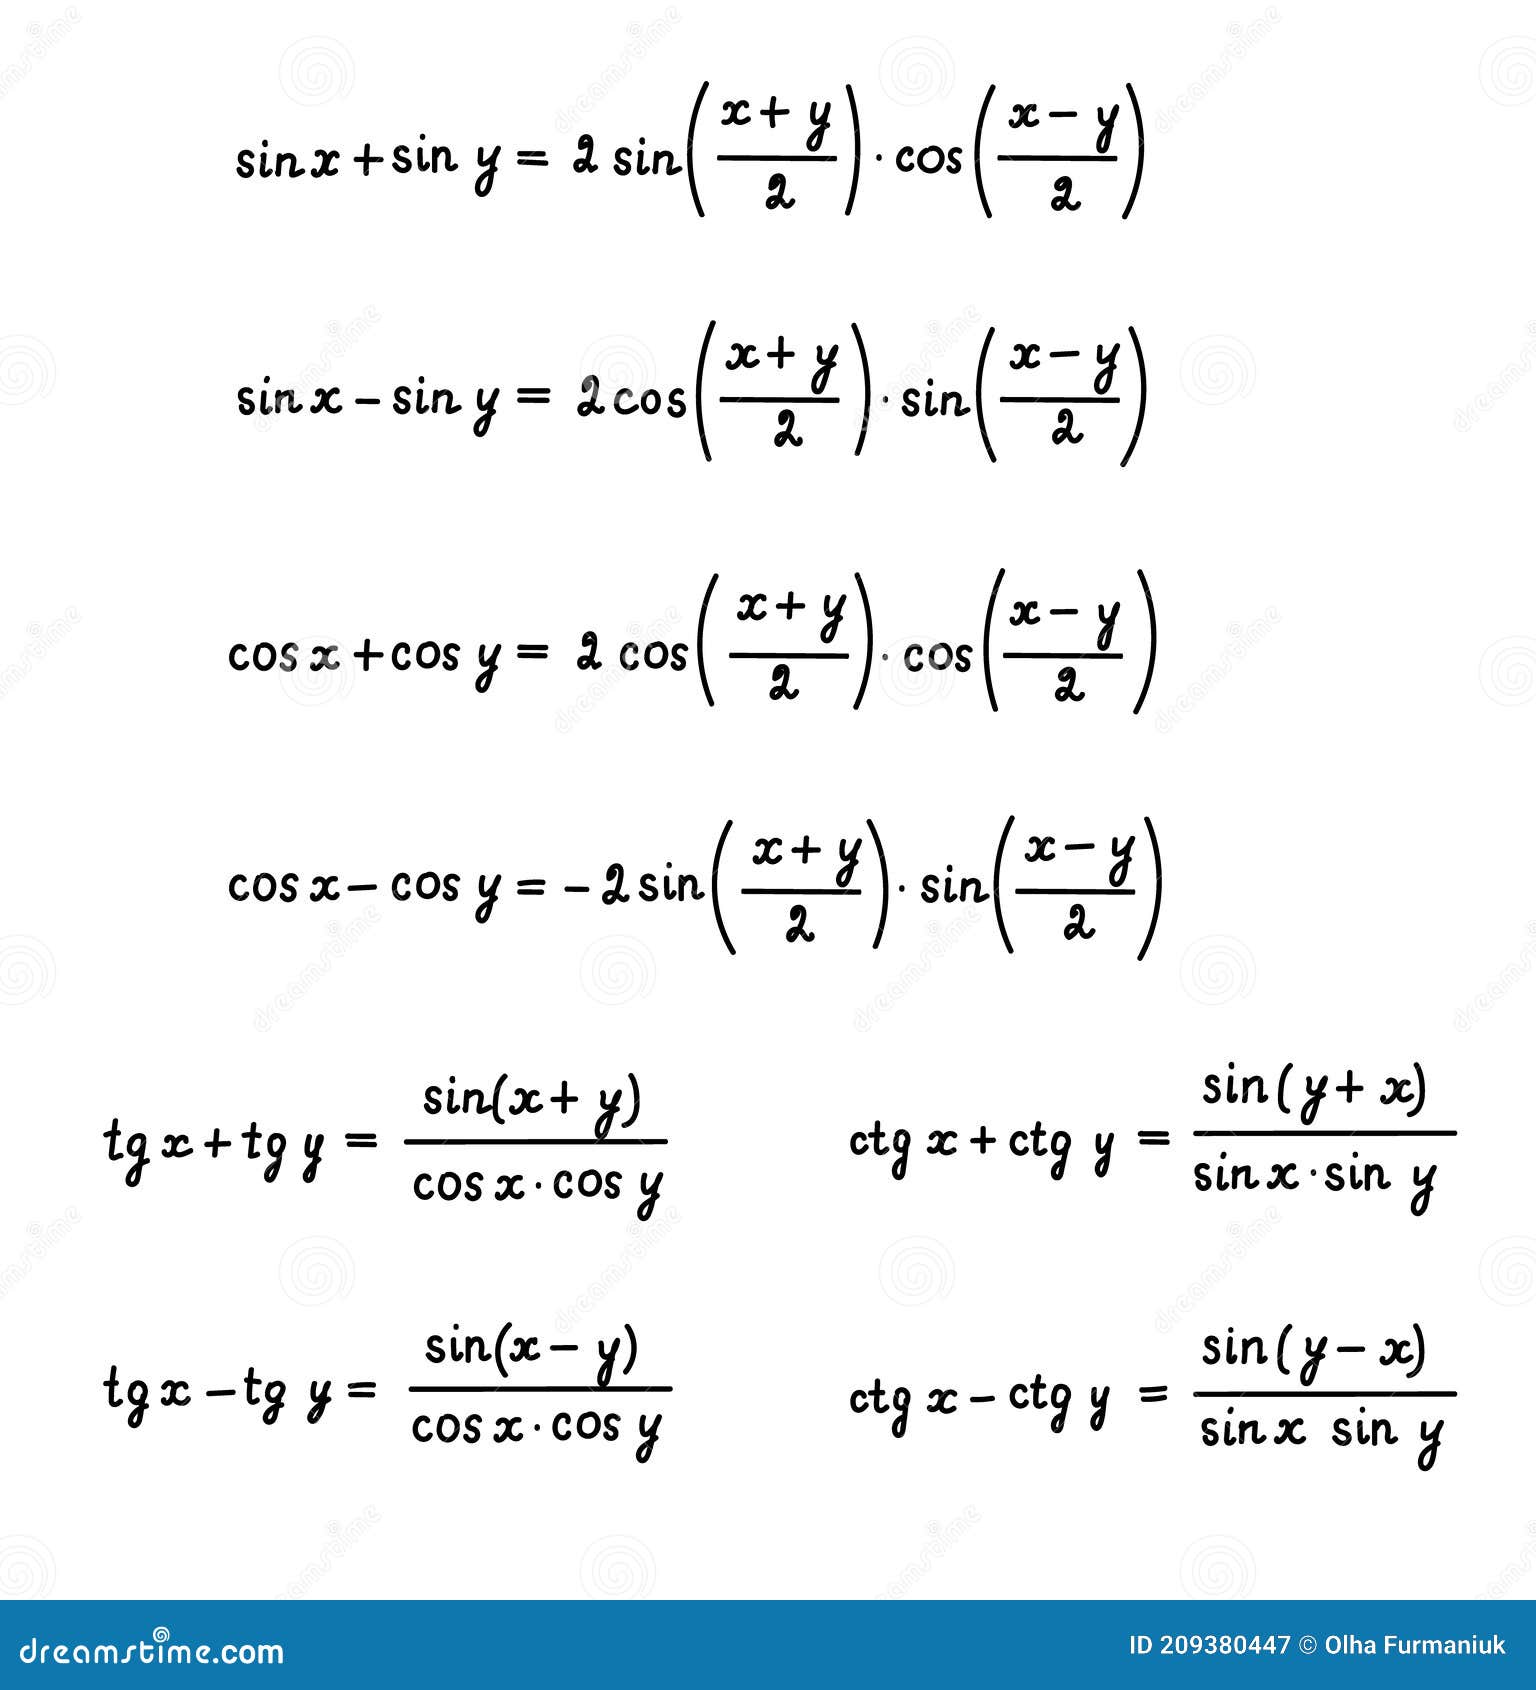 basic trigonometric identities.formulas for calculating sums and differences of angles.education, getting classes, school program